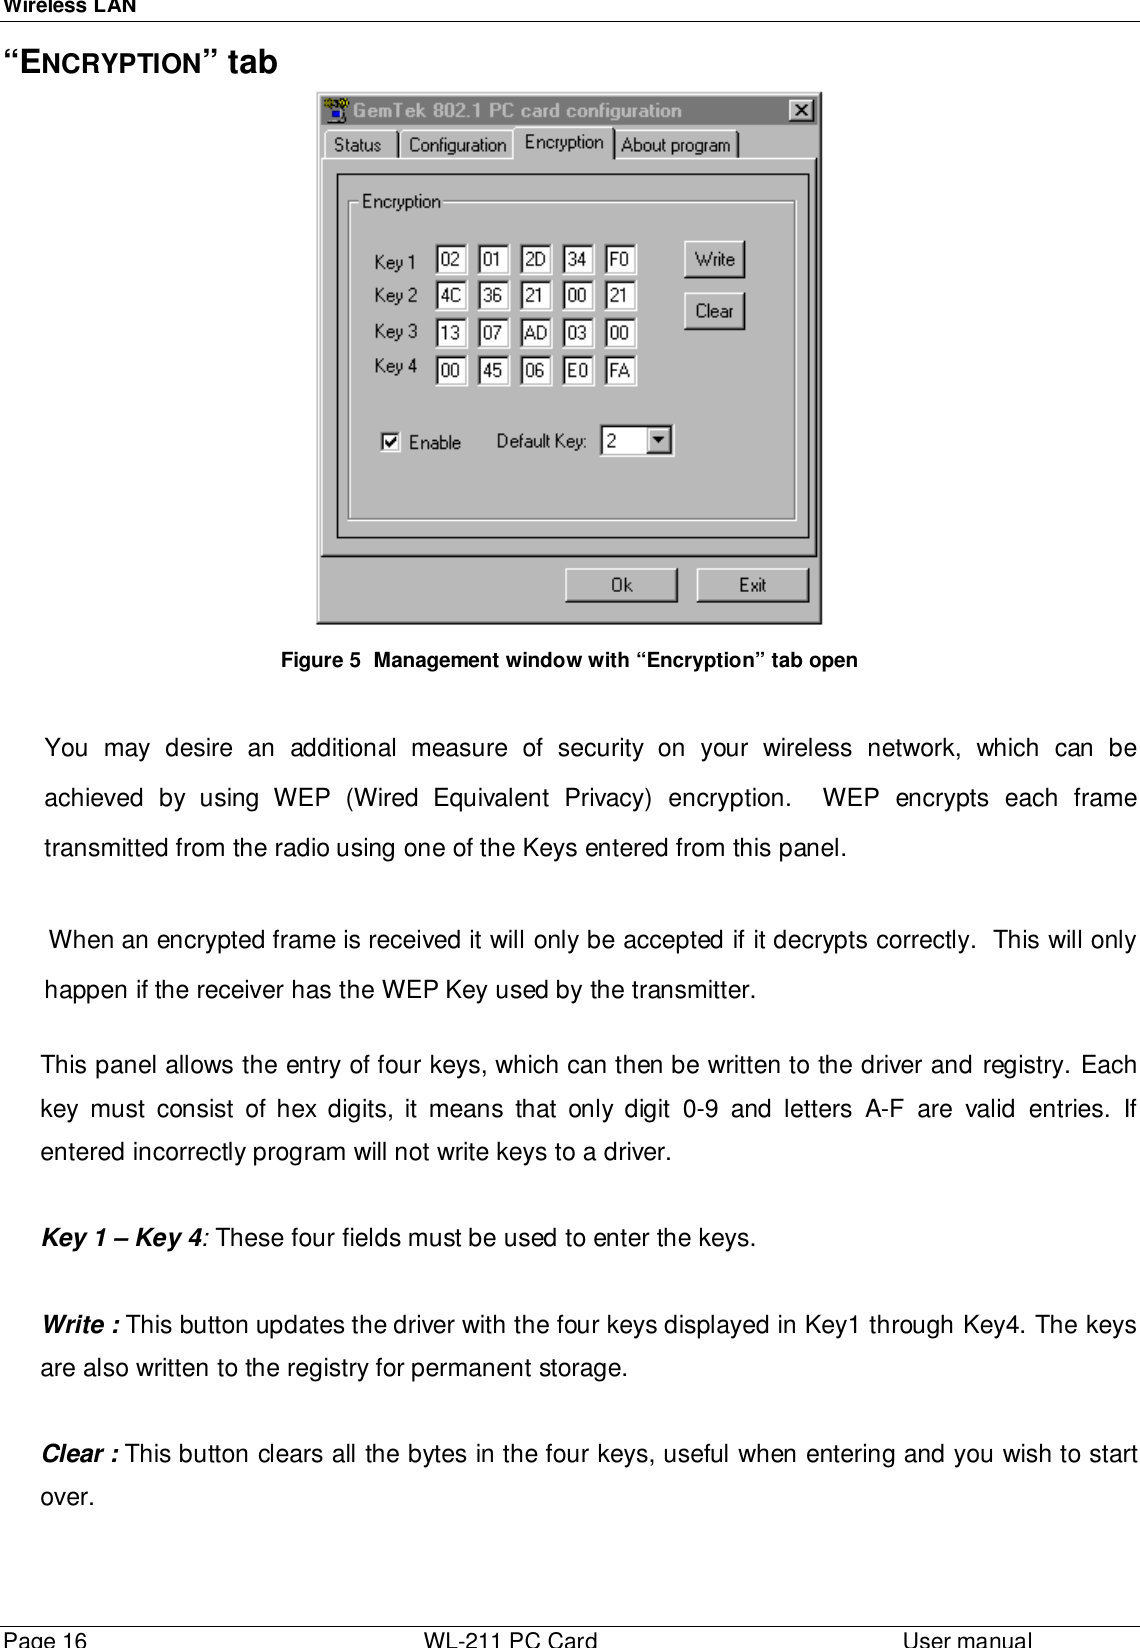 Wireless LANPage 16 WL-211 PC Card User manual“ENCRYPTION” tabFigure 5  Management window with “Encryption” tab openYou may desire an additional measure of security on your wireless network, which can beachieved by using WEP (Wired Equivalent Privacy) encryption.  WEP encrypts each frametransmitted from the radio using one of the Keys entered from this panel.When an encrypted frame is received it will only be accepted if it decrypts correctly.  This will onlyhappen if the receiver has the WEP Key used by the transmitter.This panel allows the entry of four keys, which can then be written to the driver and registry. Eachkey must consist of hex digits, it means that only digit 0-9 and letters A-F are valid entries. Ifentered incorrectly program will not write keys to a driver.Key 1 – Key 4: These four fields must be used to enter the keys.Write : This button updates the driver with the four keys displayed in Key1 through Key4. The keysare also written to the registry for permanent storage.Clear : This button clears all the bytes in the four keys, useful when entering and you wish to startover.